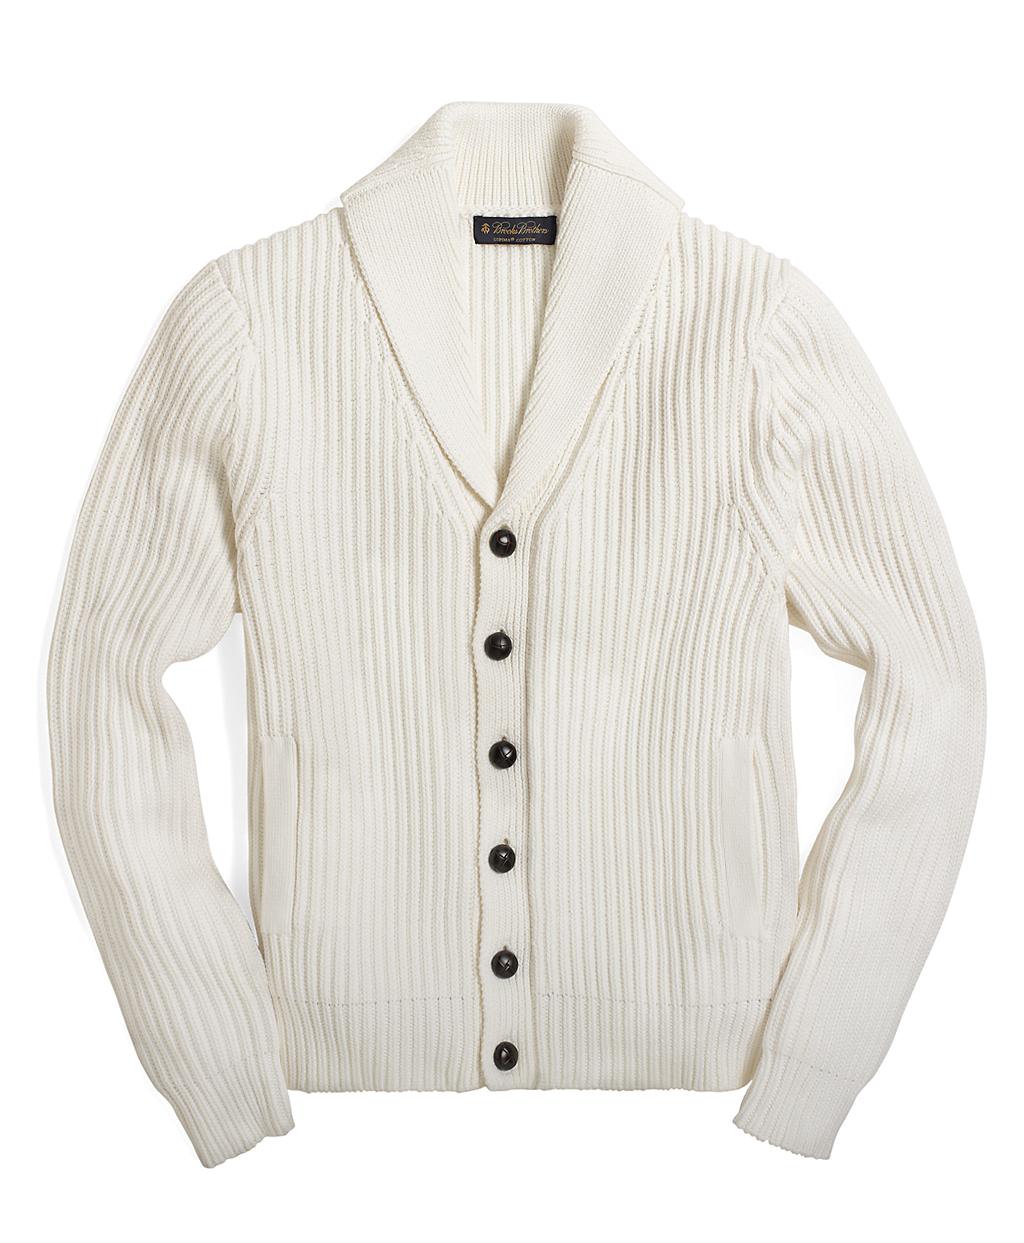 Lyst - Brooks Brothers Supima Shawl Collar Cardigan in Natural for Men